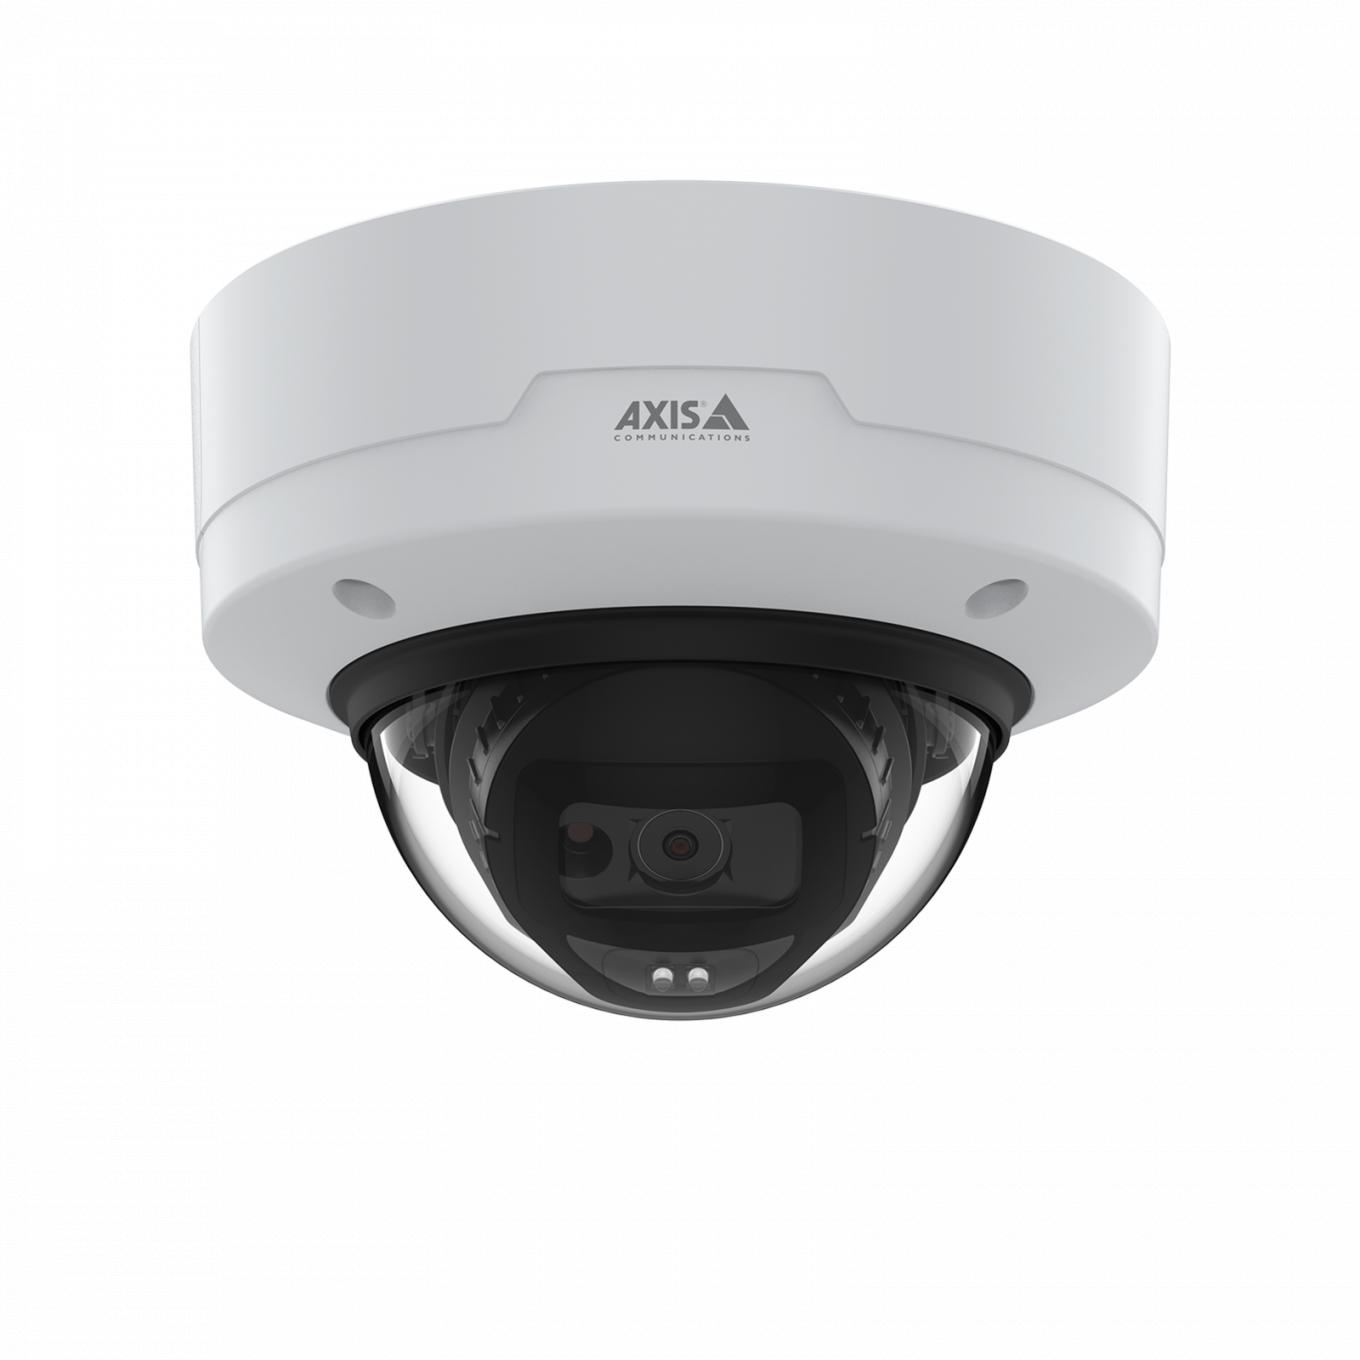 AXIS M3215-LVE in black and white, mounted in the celing